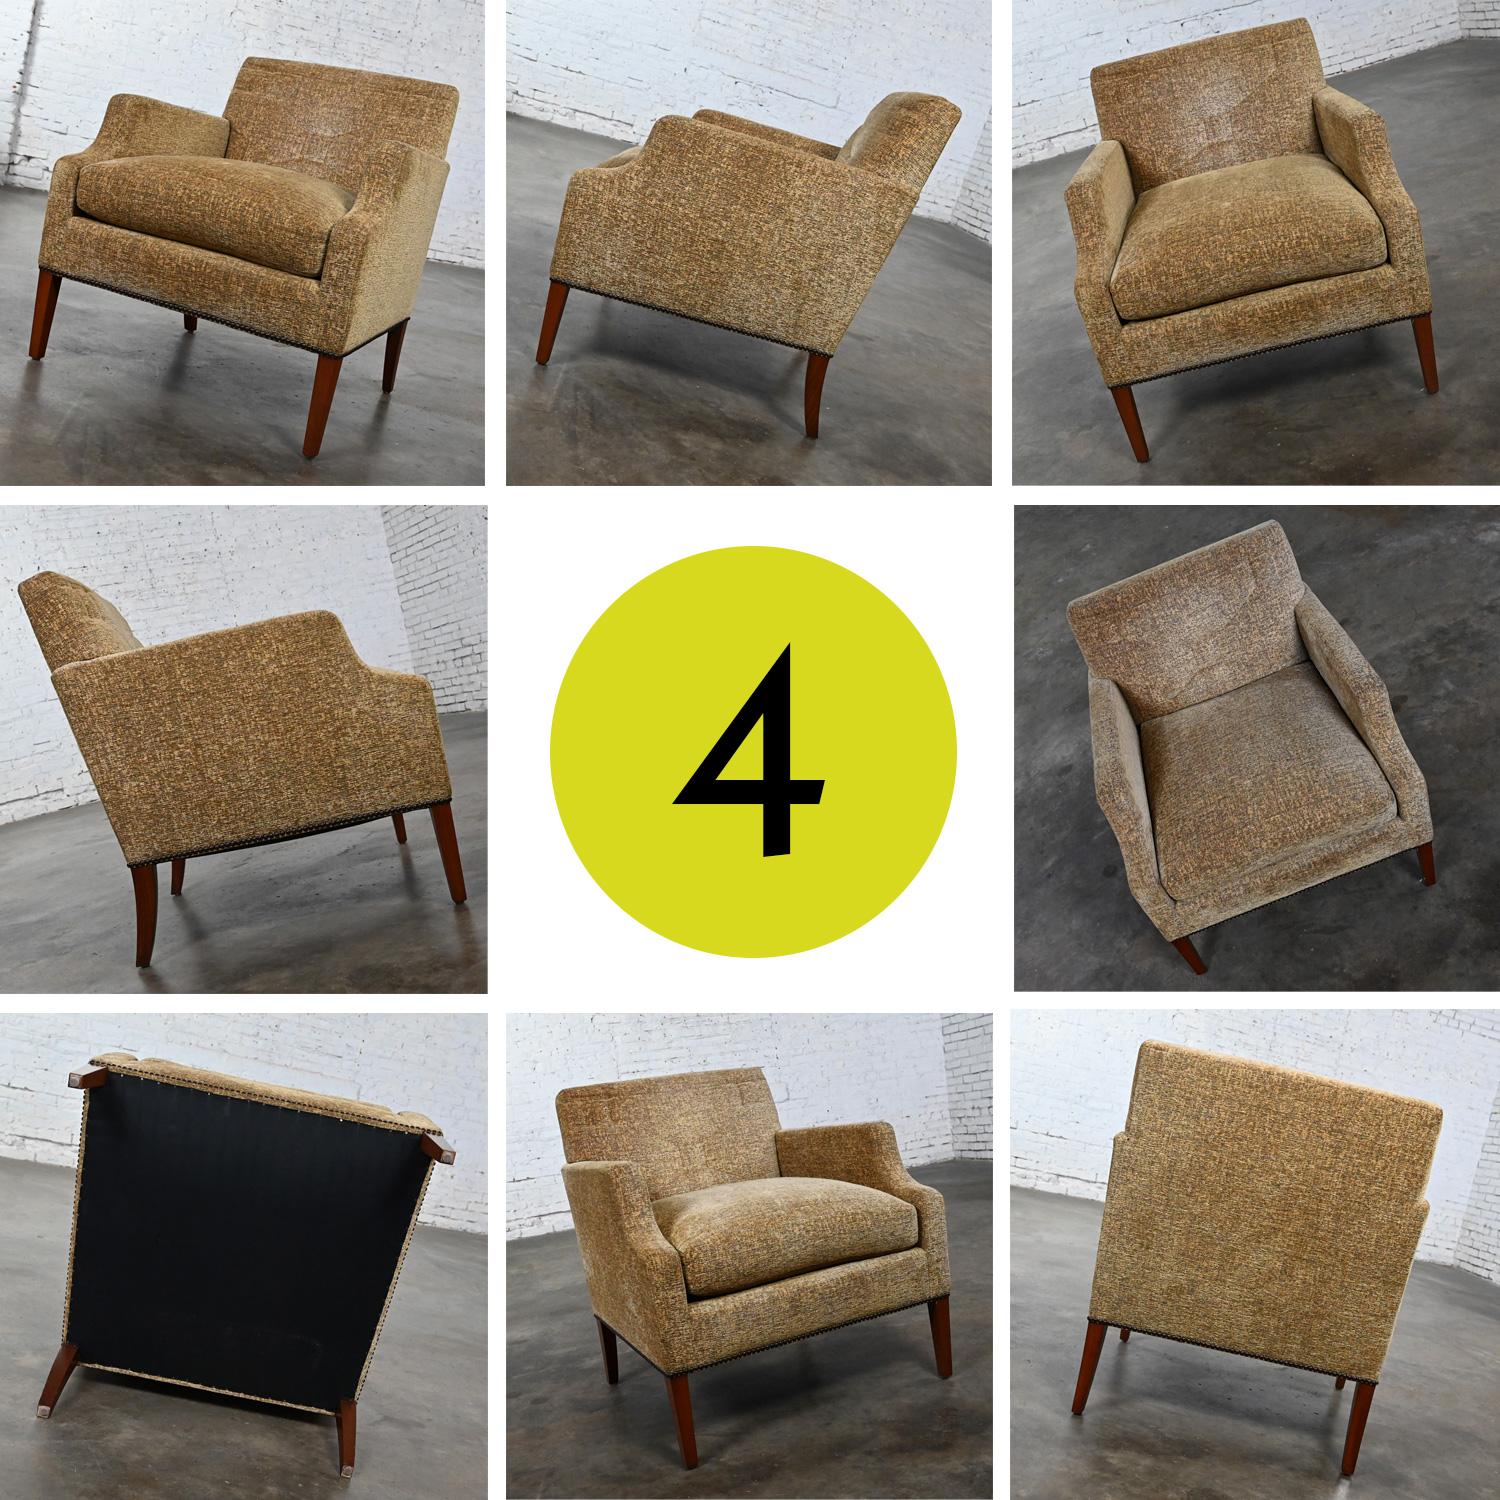 Late 20th - Early 21st Century Modern Khaki Accent Lounge Chair Down Seat For Sale 11